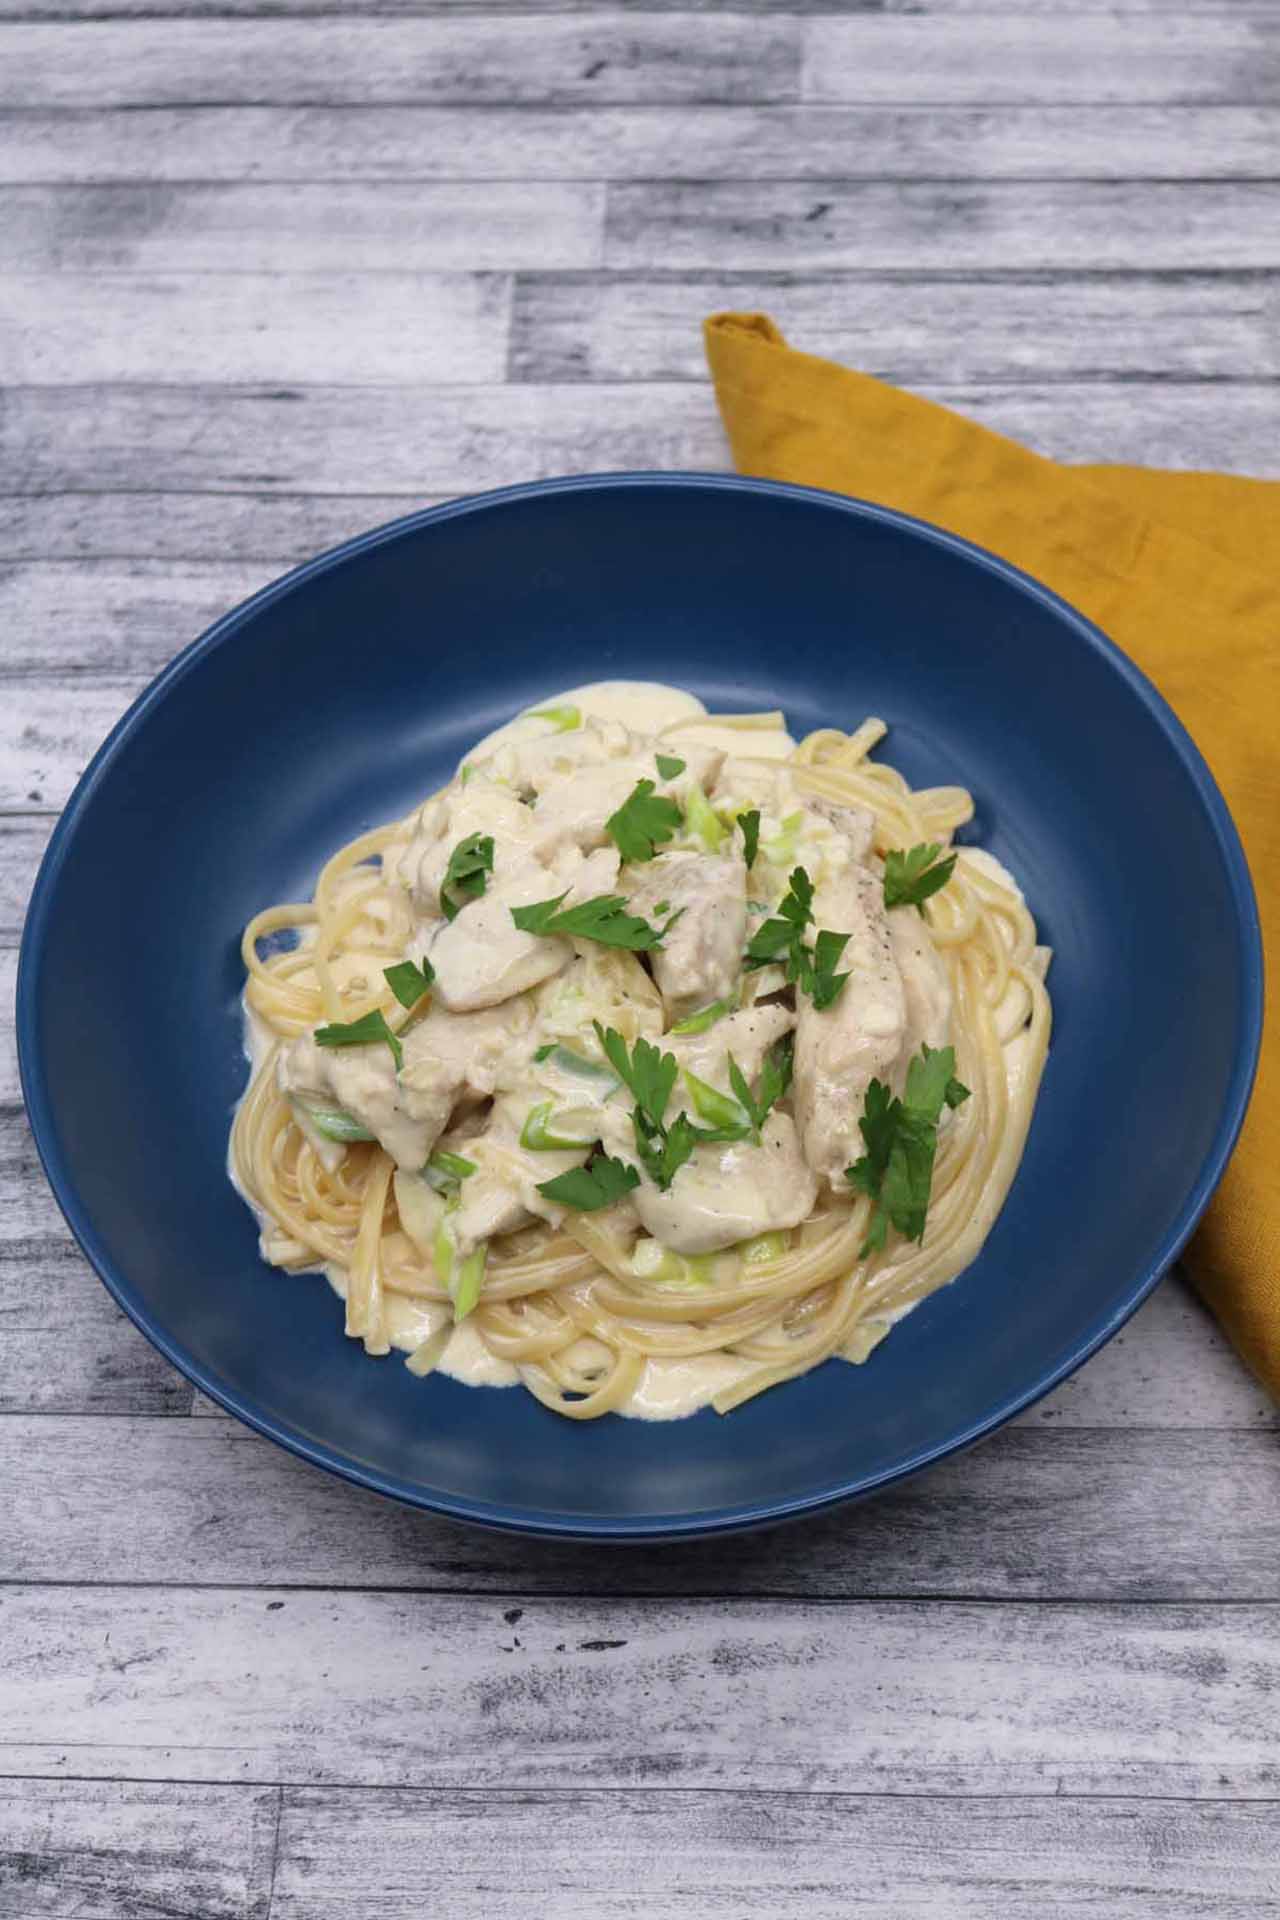 Linguine with Chicken in an Onion Cream Sauce, Linguine with Chicken in an Onion Cream Sauce